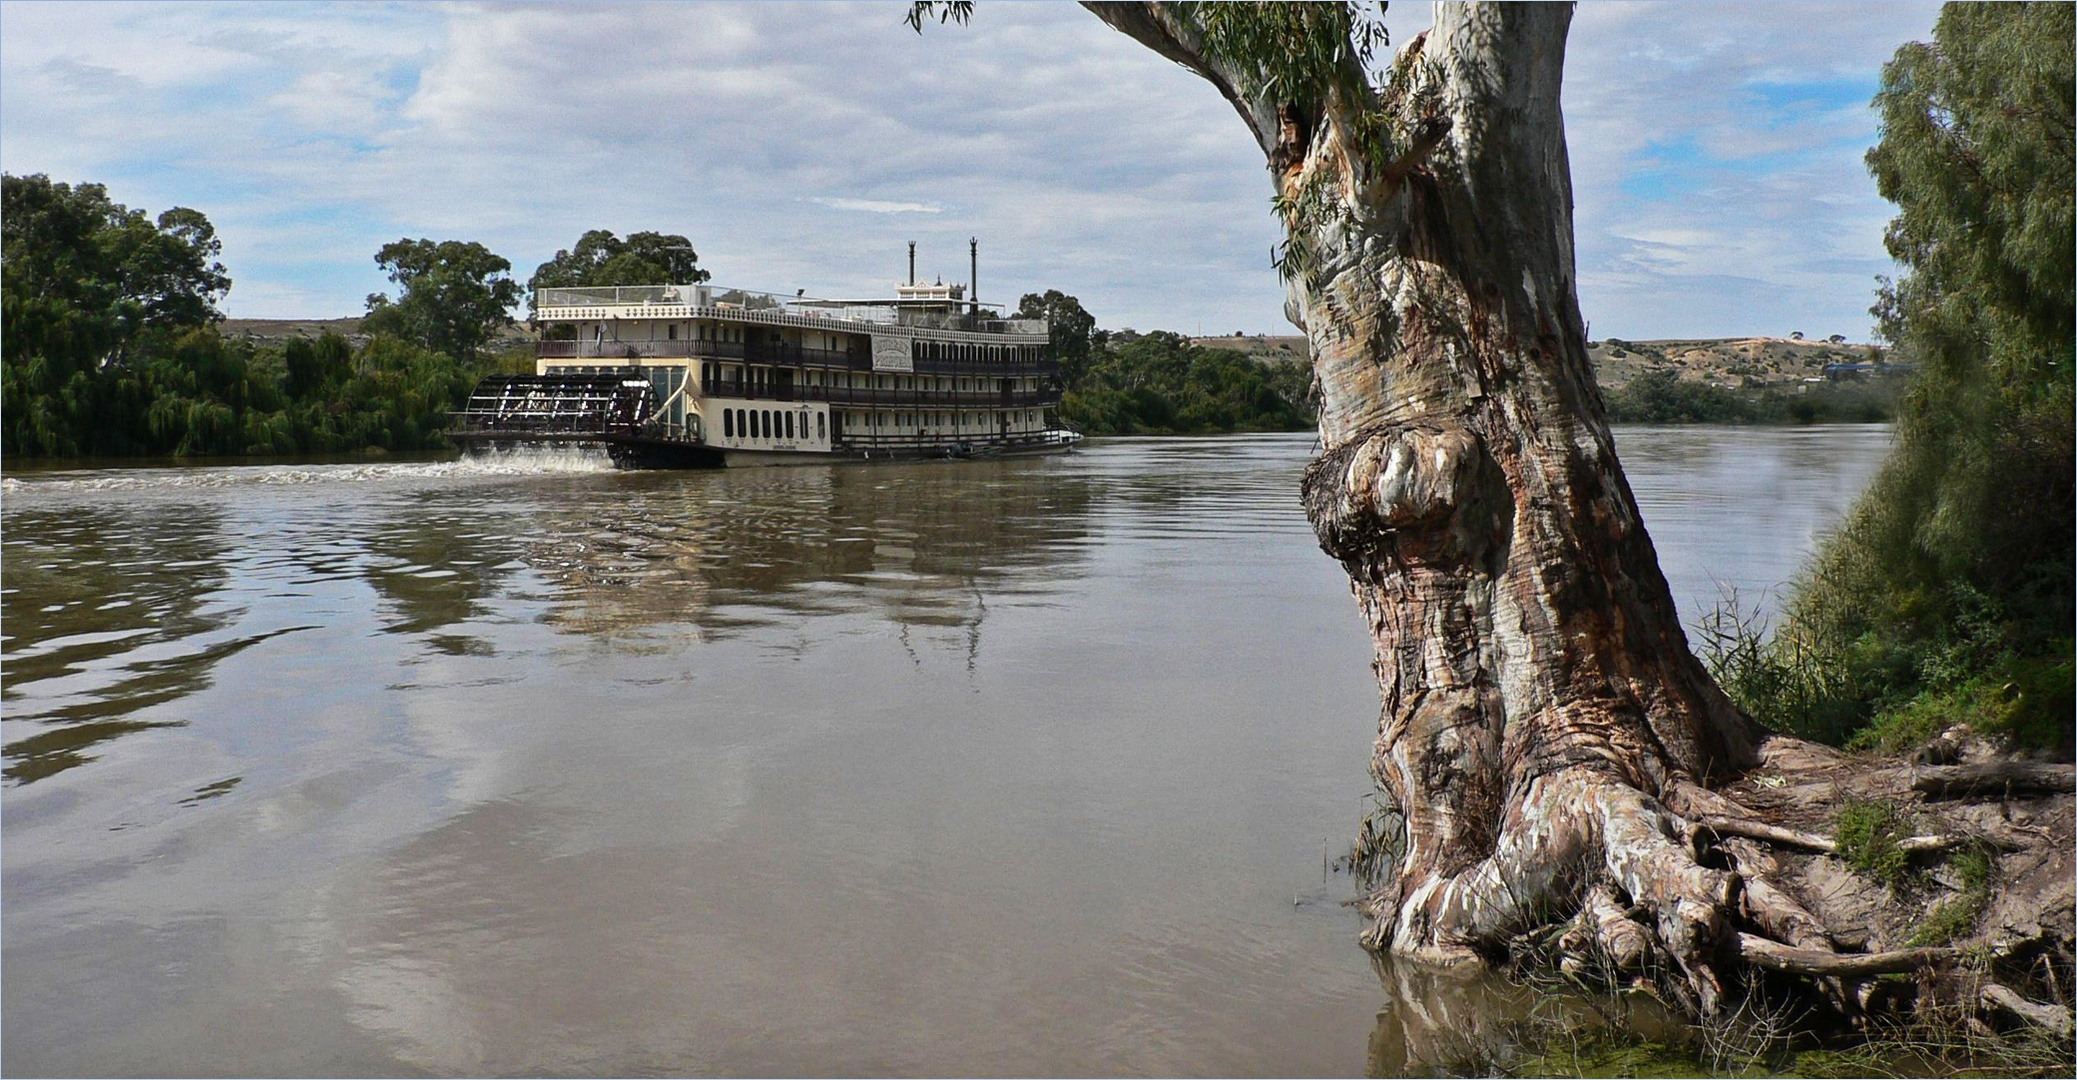 * the Murray Princess and the old River Gum *